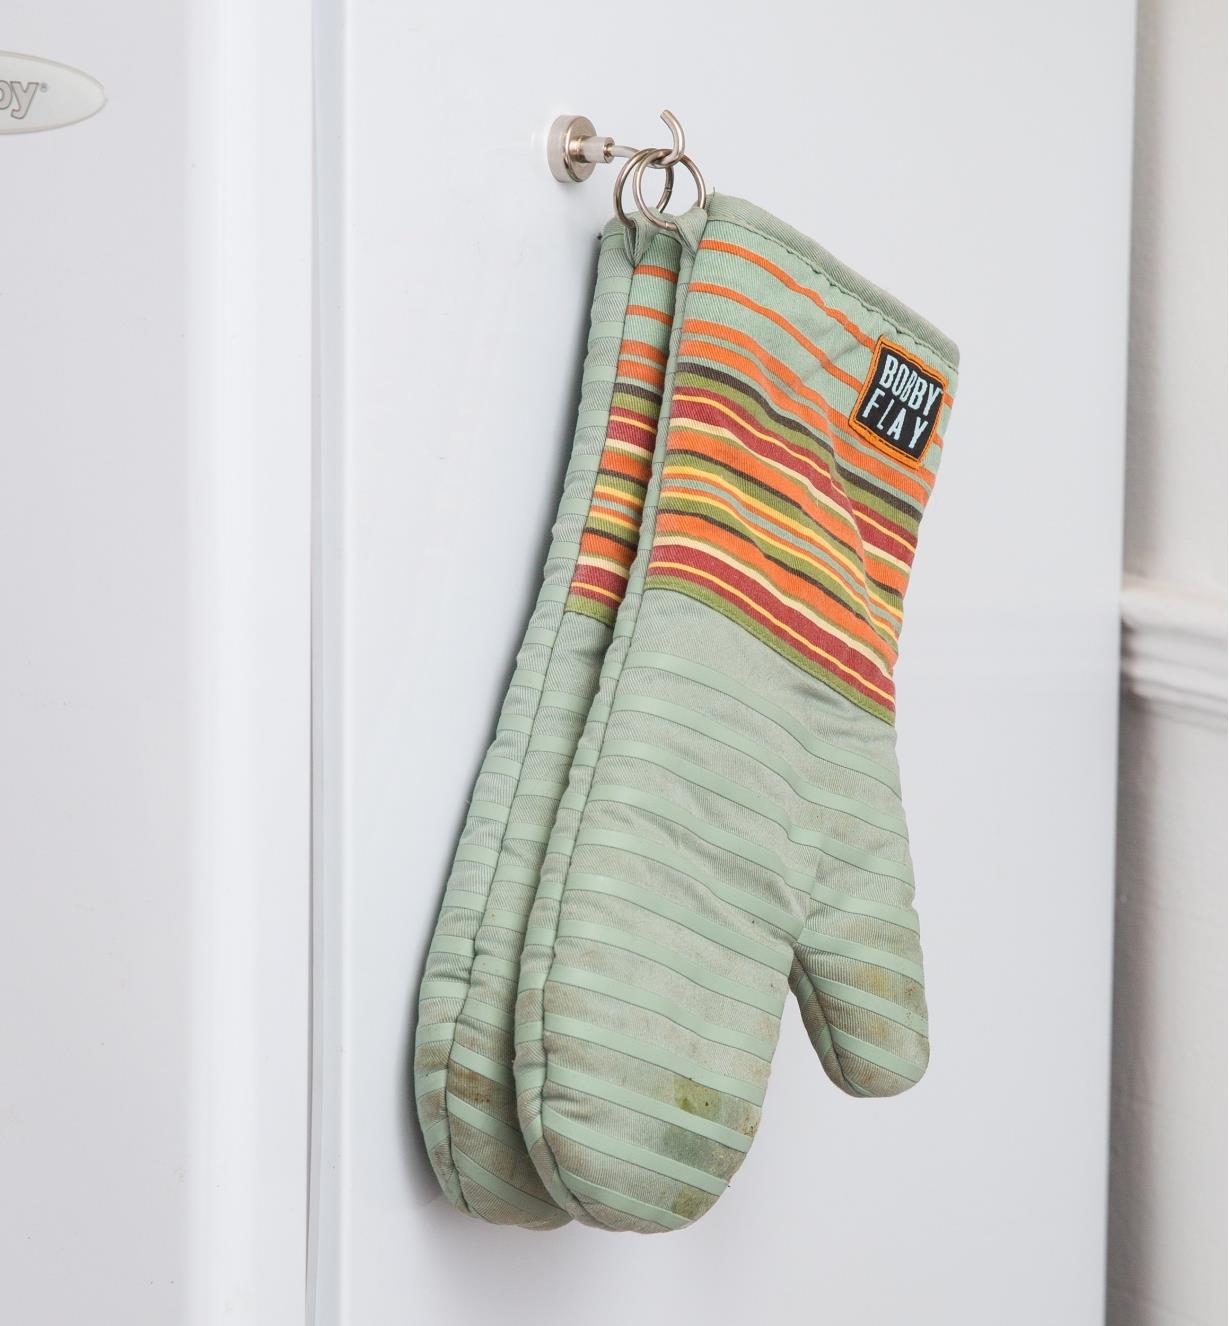 Oven mitts hanging on a magnet-mounted hook attached to a fridge